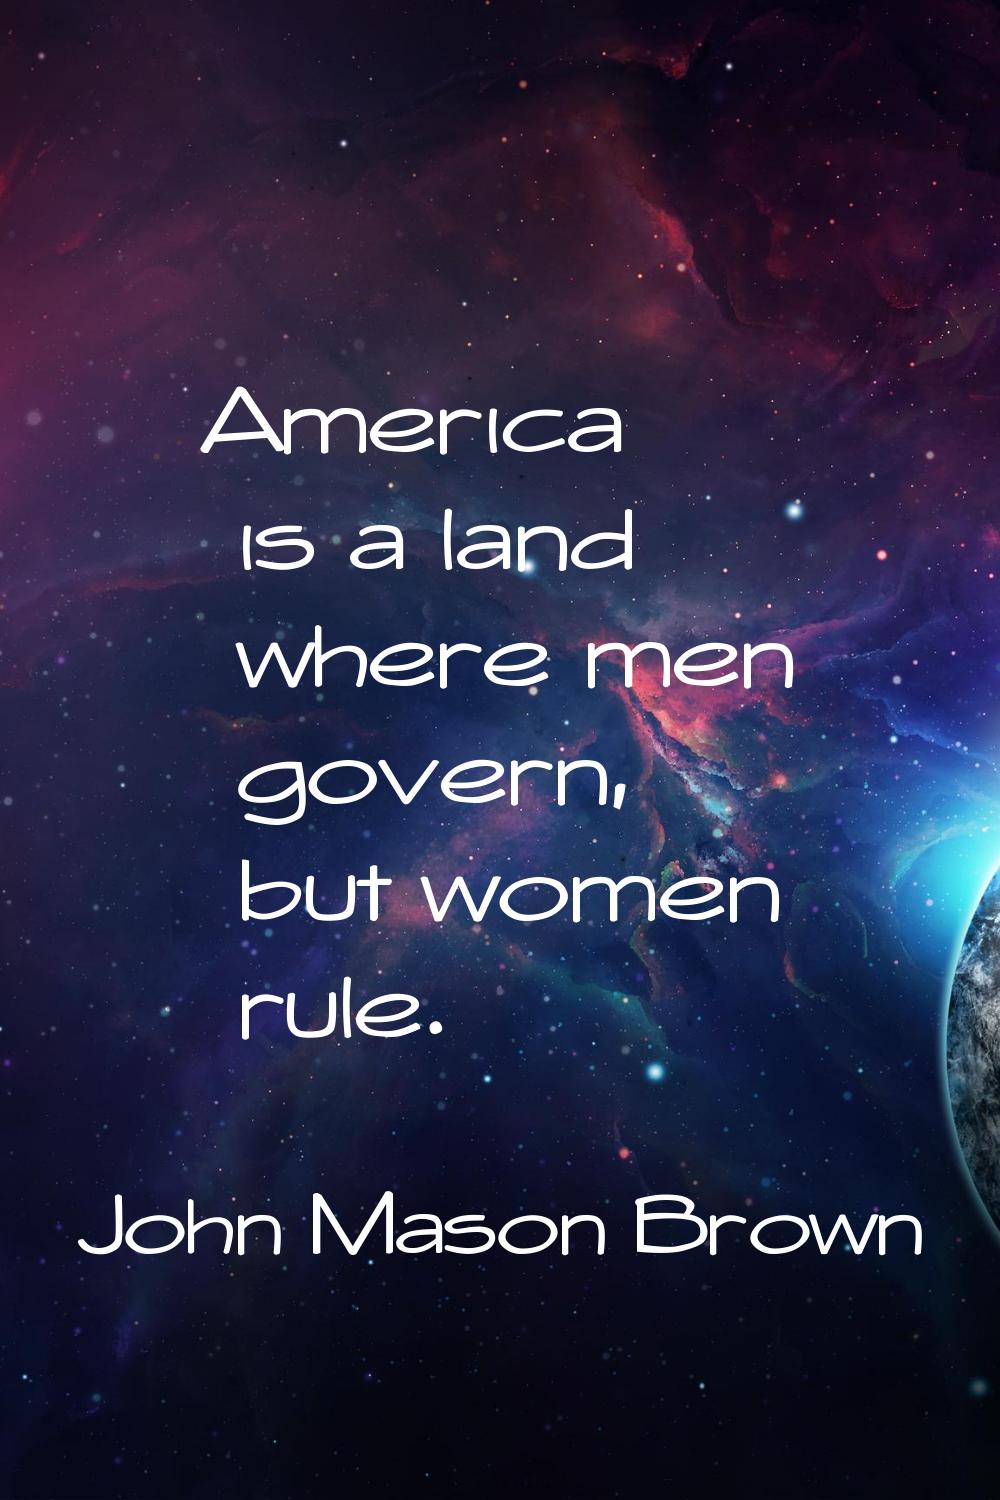 America is a land where men govern, but women rule.